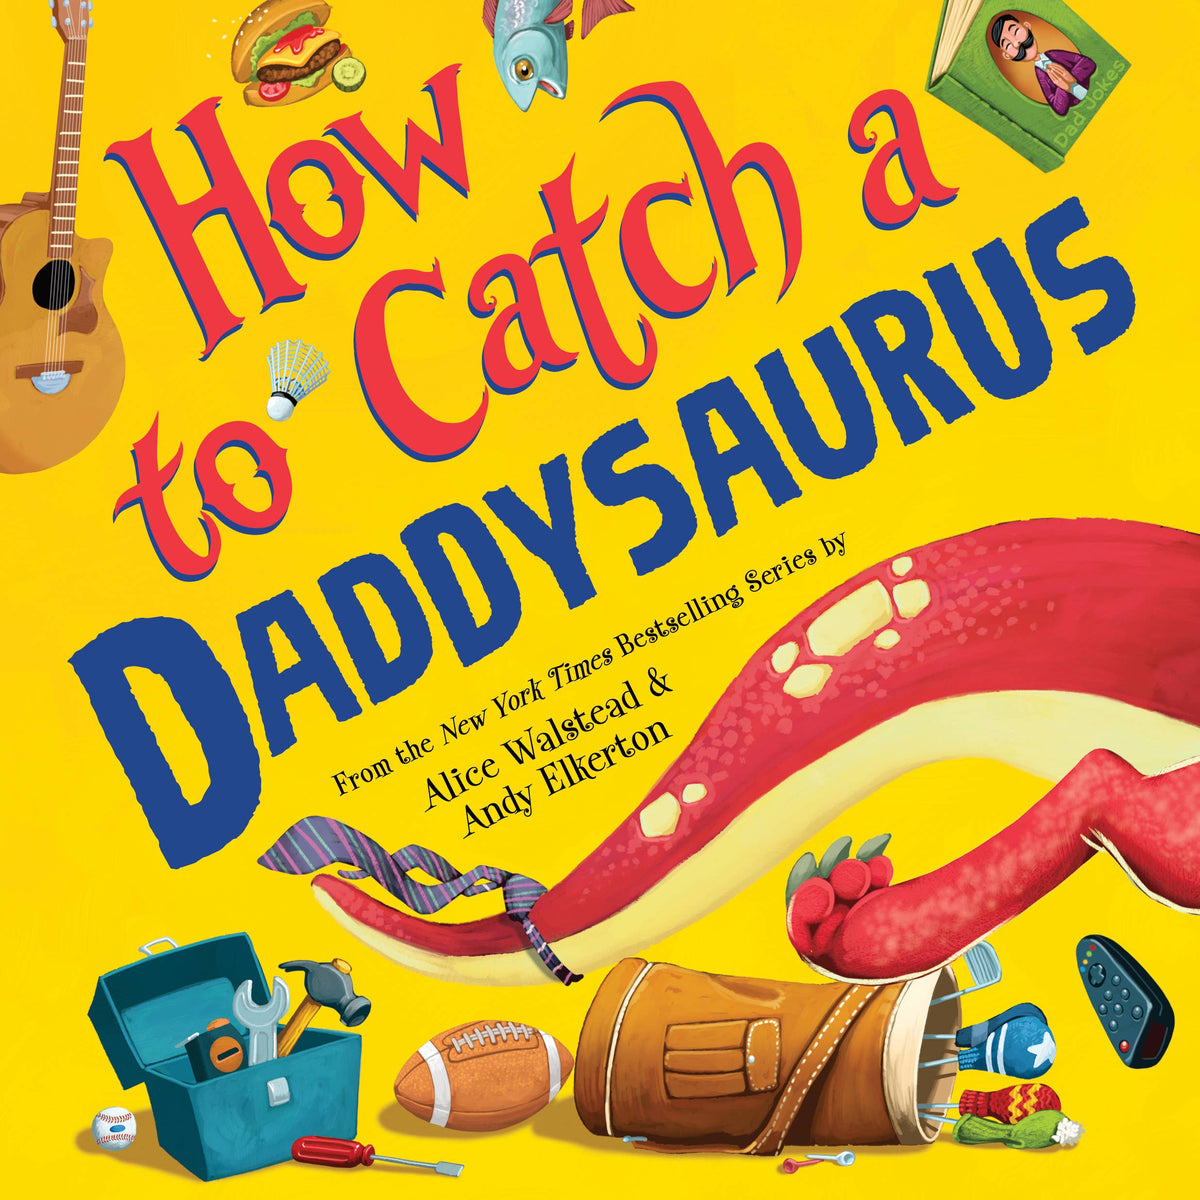 How to Catch a Daddysaurus*